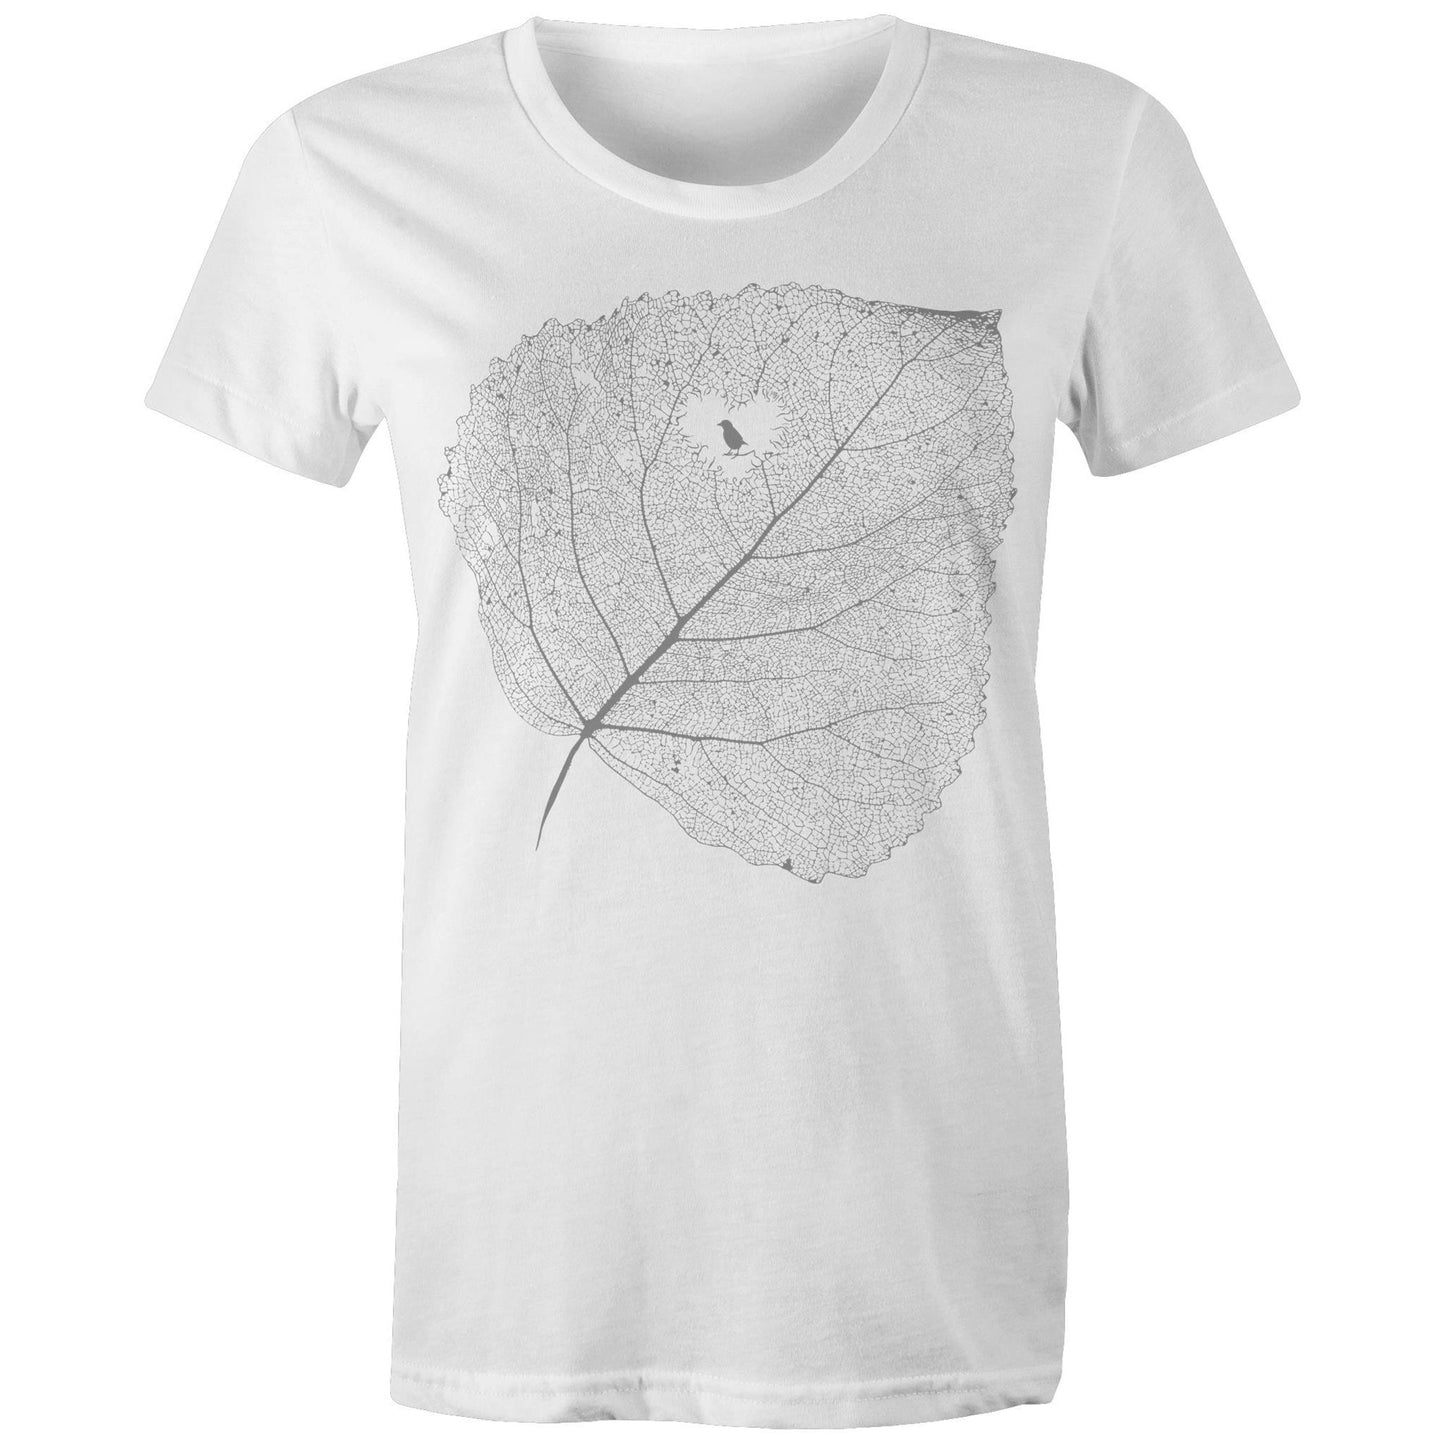 Ghost of Leaf and Feather - Women's T-Shirt